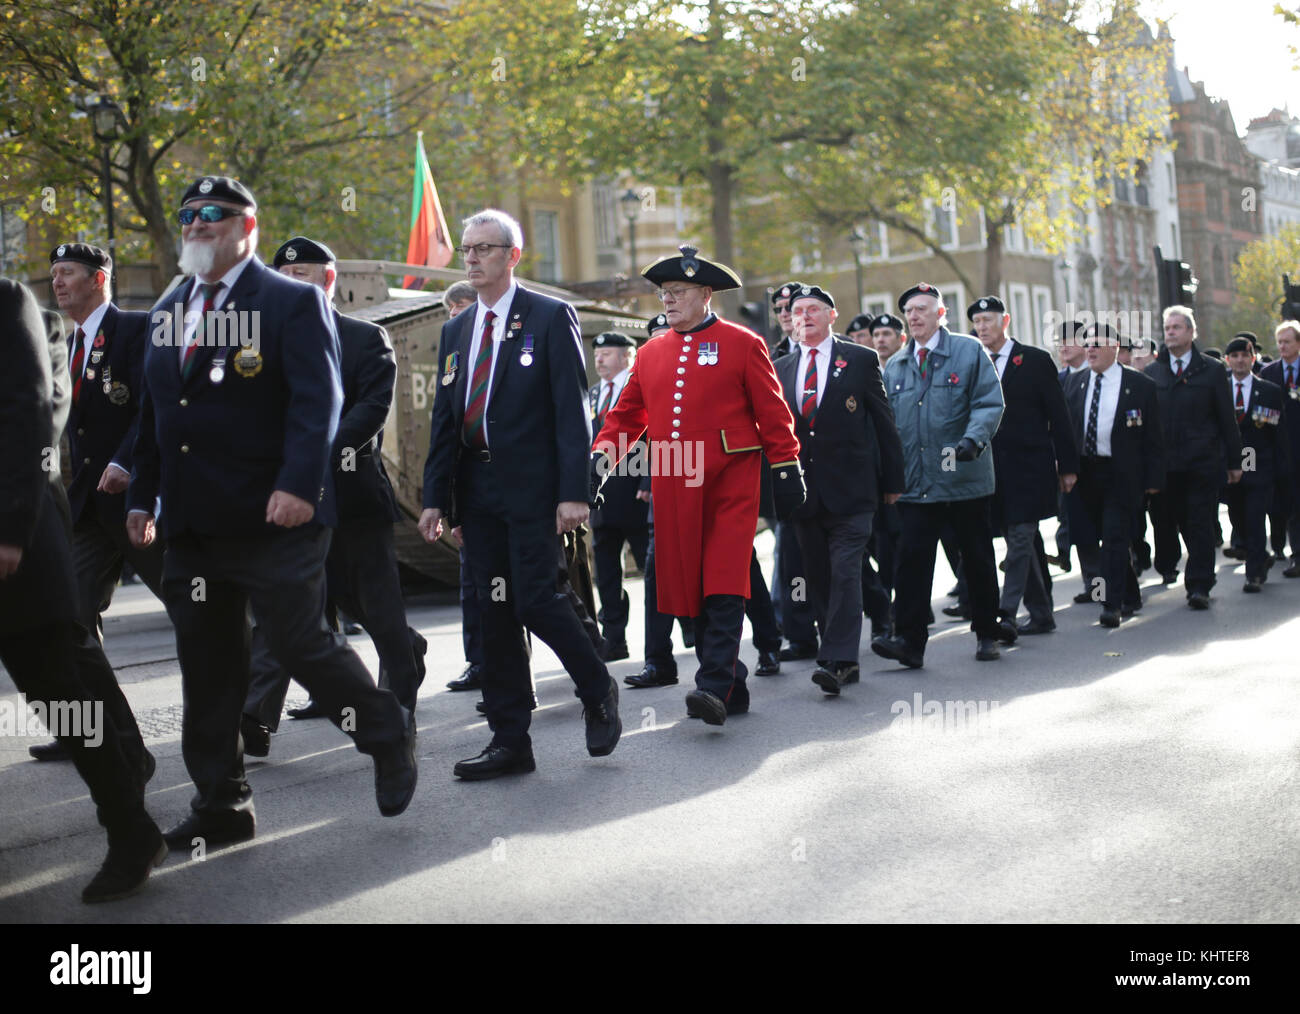 Veterans of the Royal Tank Regiment Association during a parade to mark the centenary of the Battle of Cambrai, at the Cenotaph in London. Stock Photo